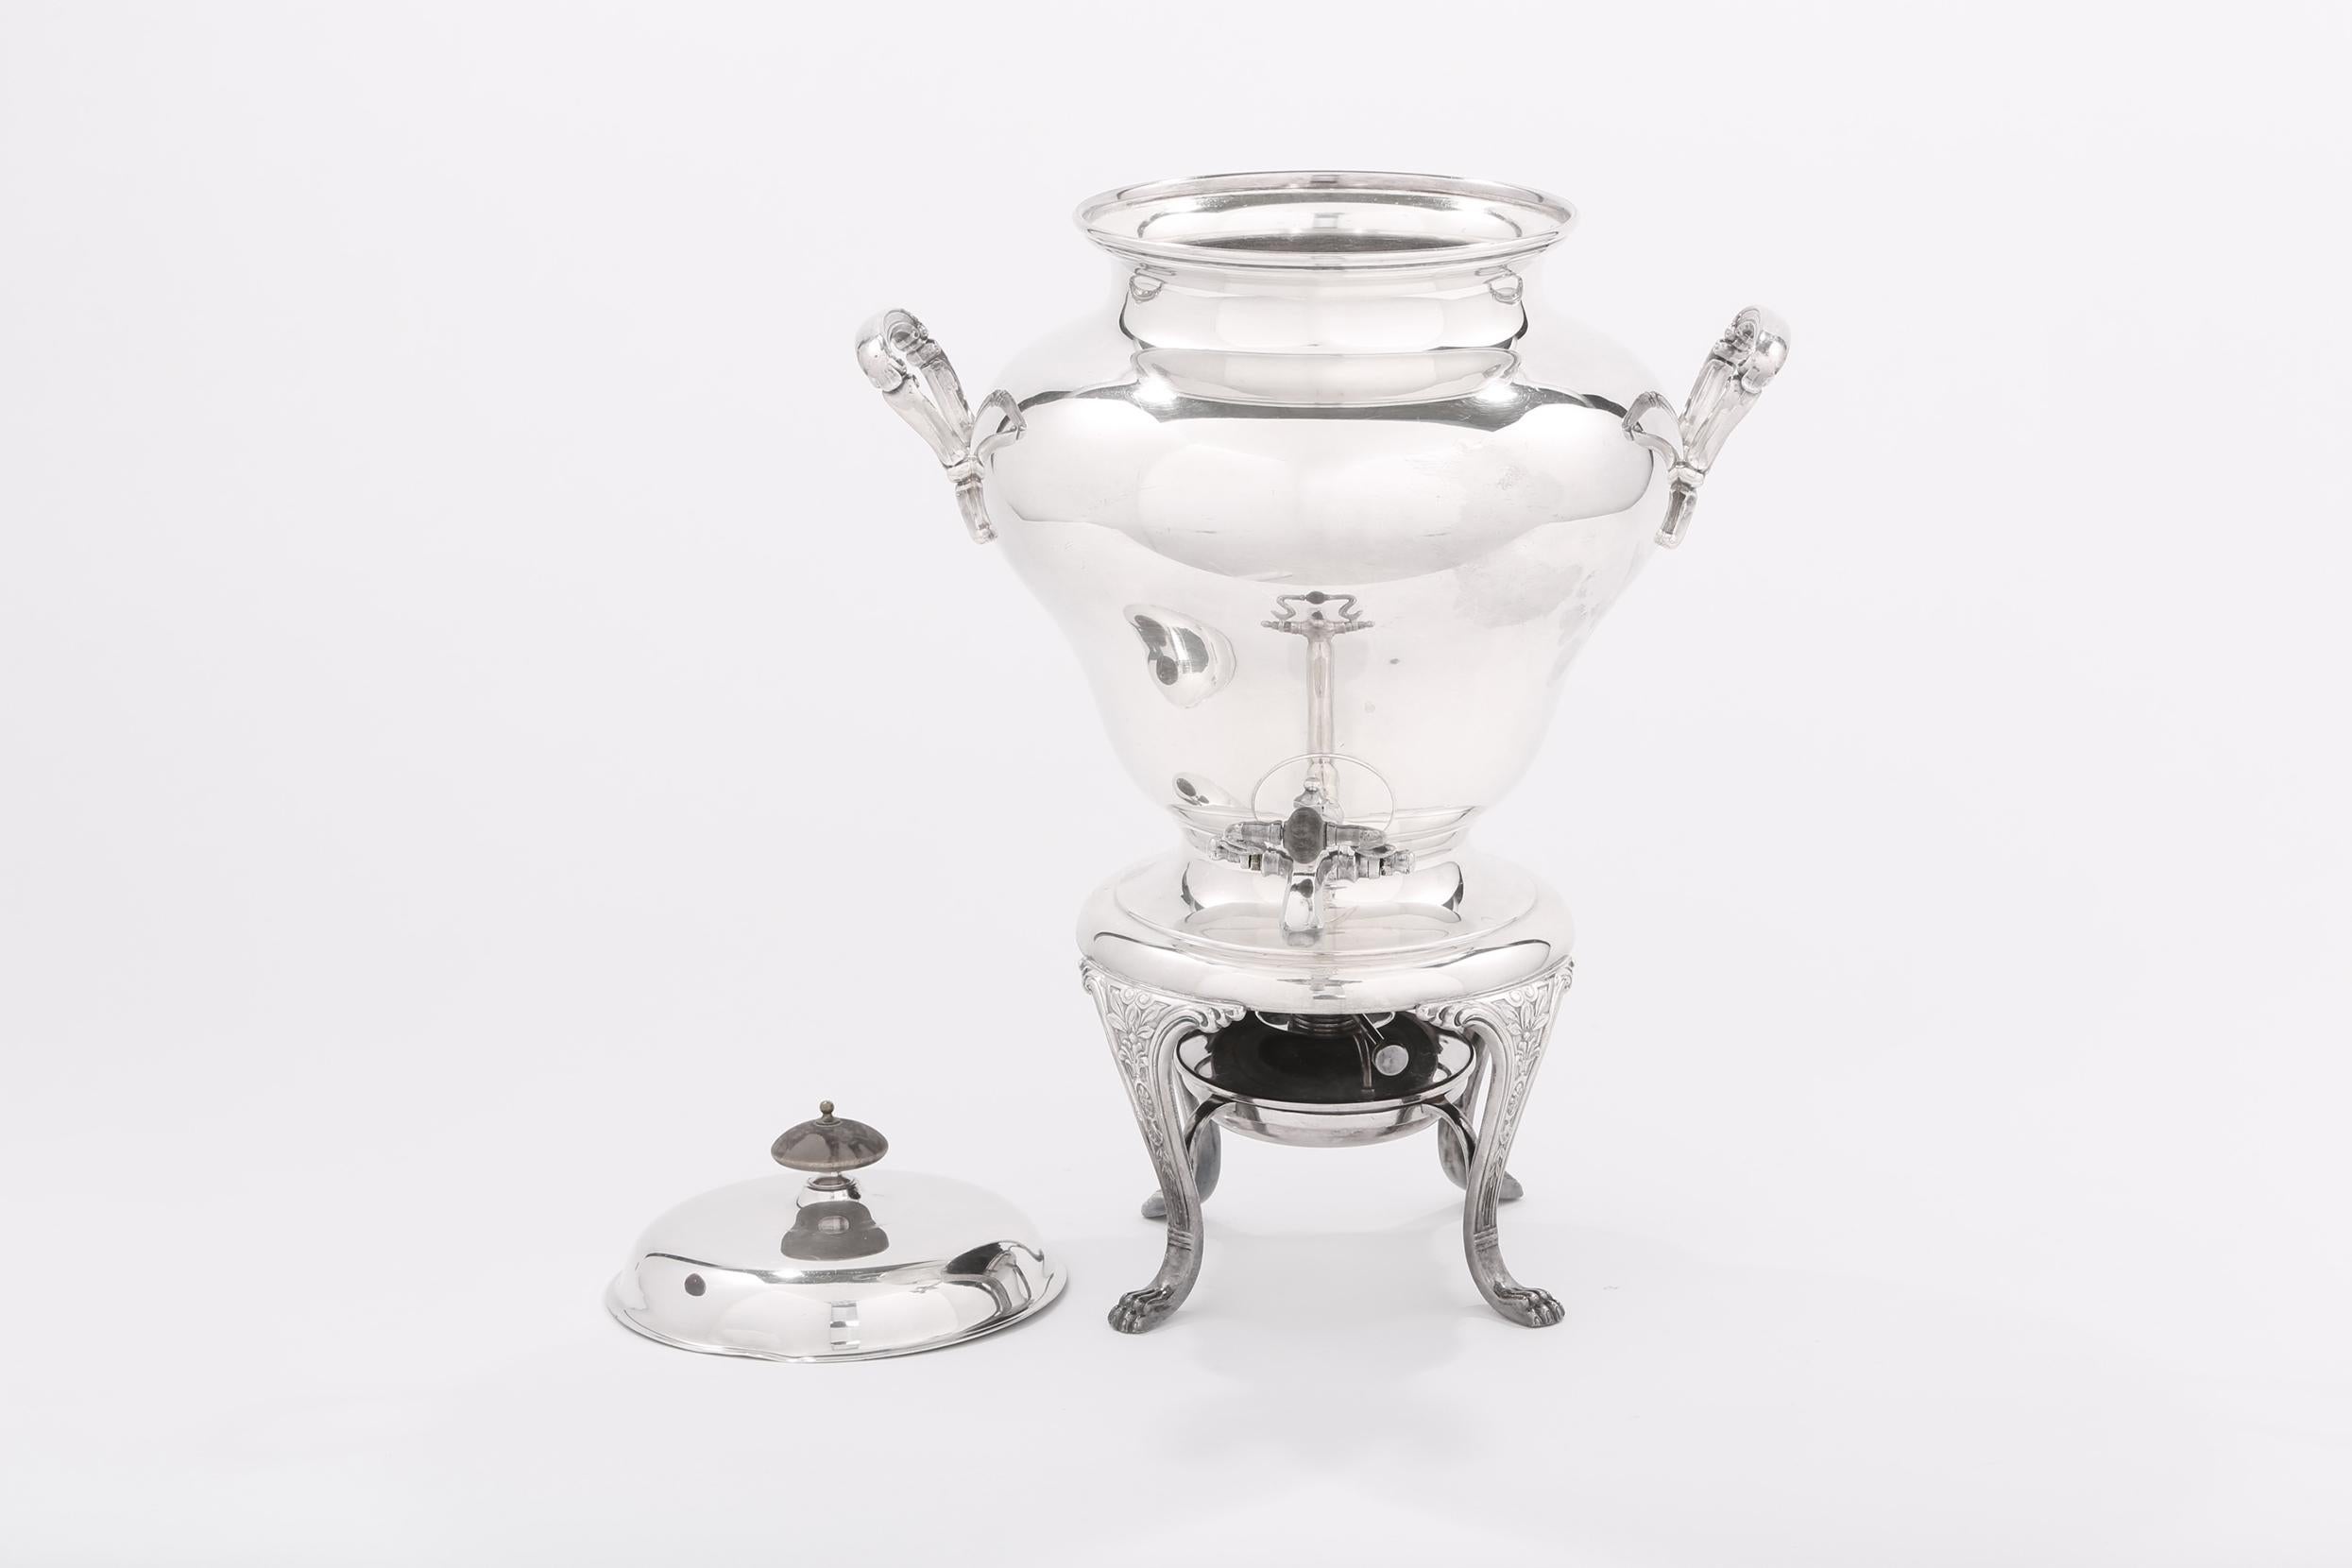 Late 19th century English silver plated samovar / tea or coffee urn with double handles and wood finial lid on four paw feet. The samovar / tea urn is in good antique condition. Minor wear consistent with age / use. Minor dent on the lid cover. The